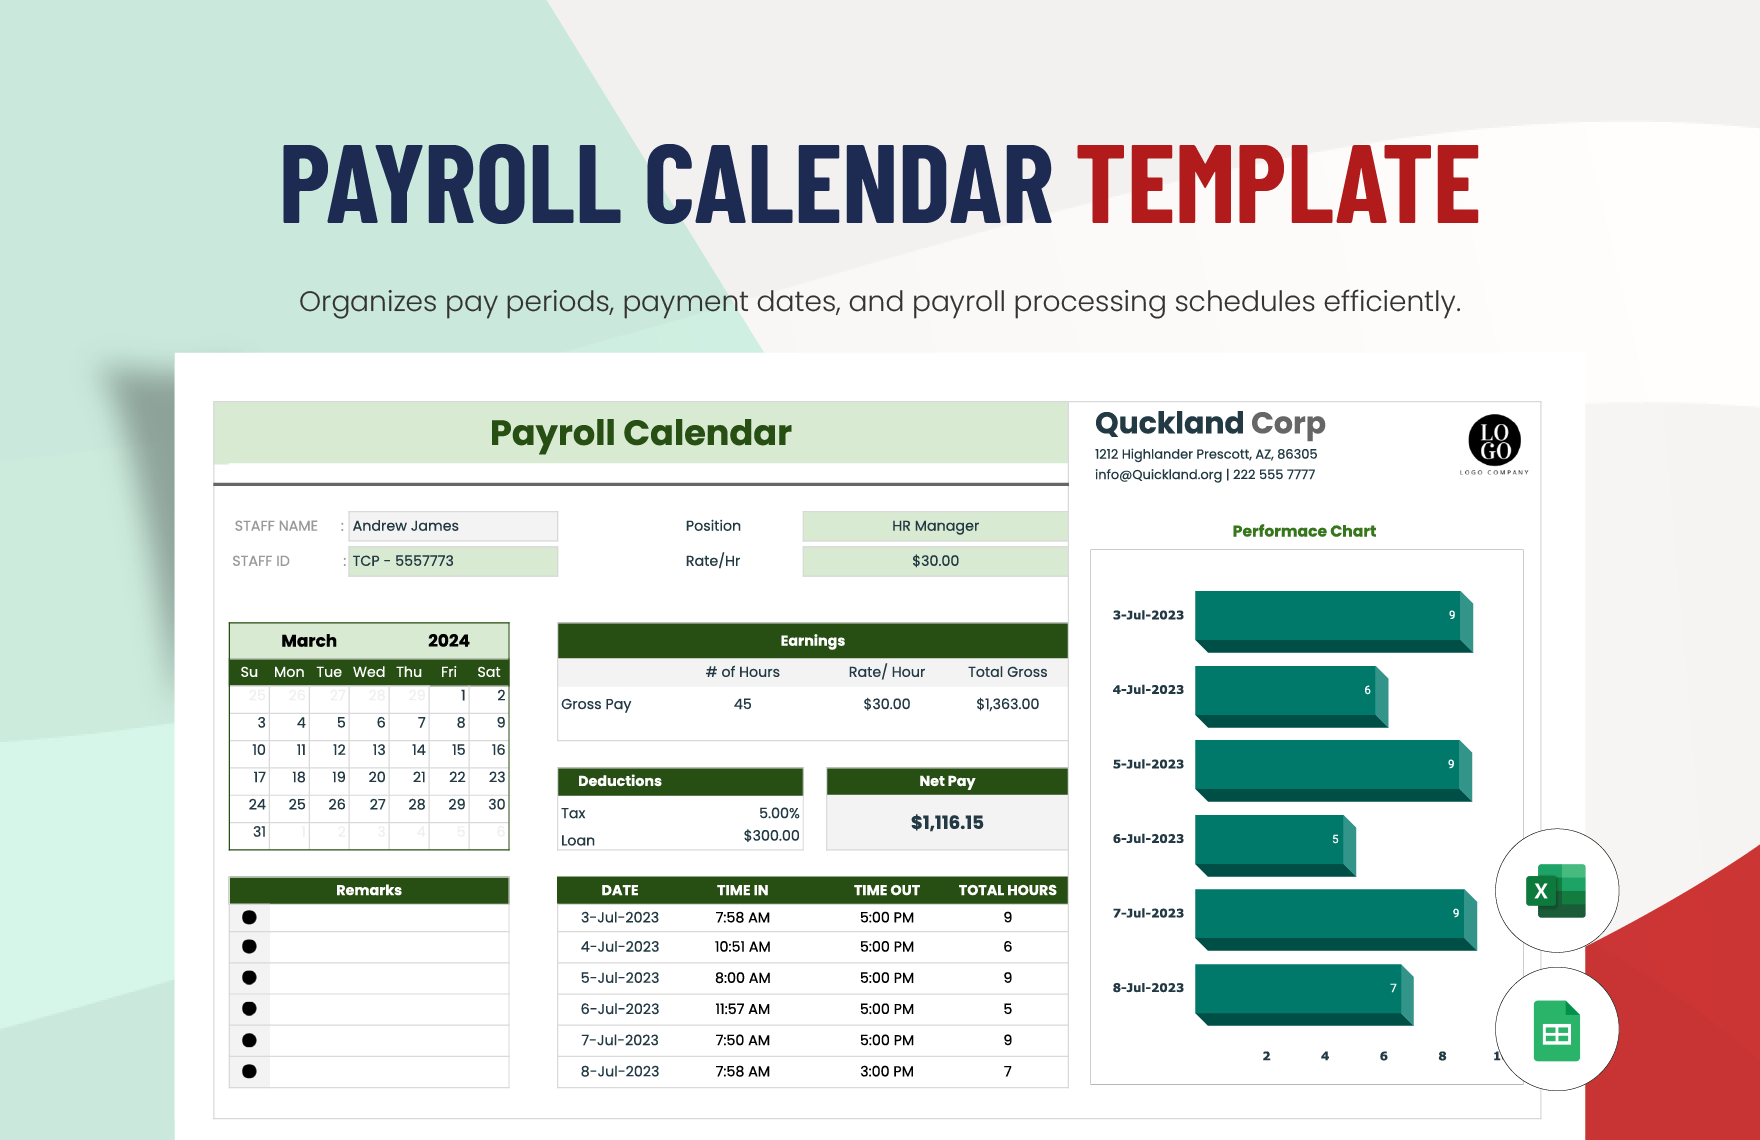 Payroll Calendar Template in Excel, Google Sheets